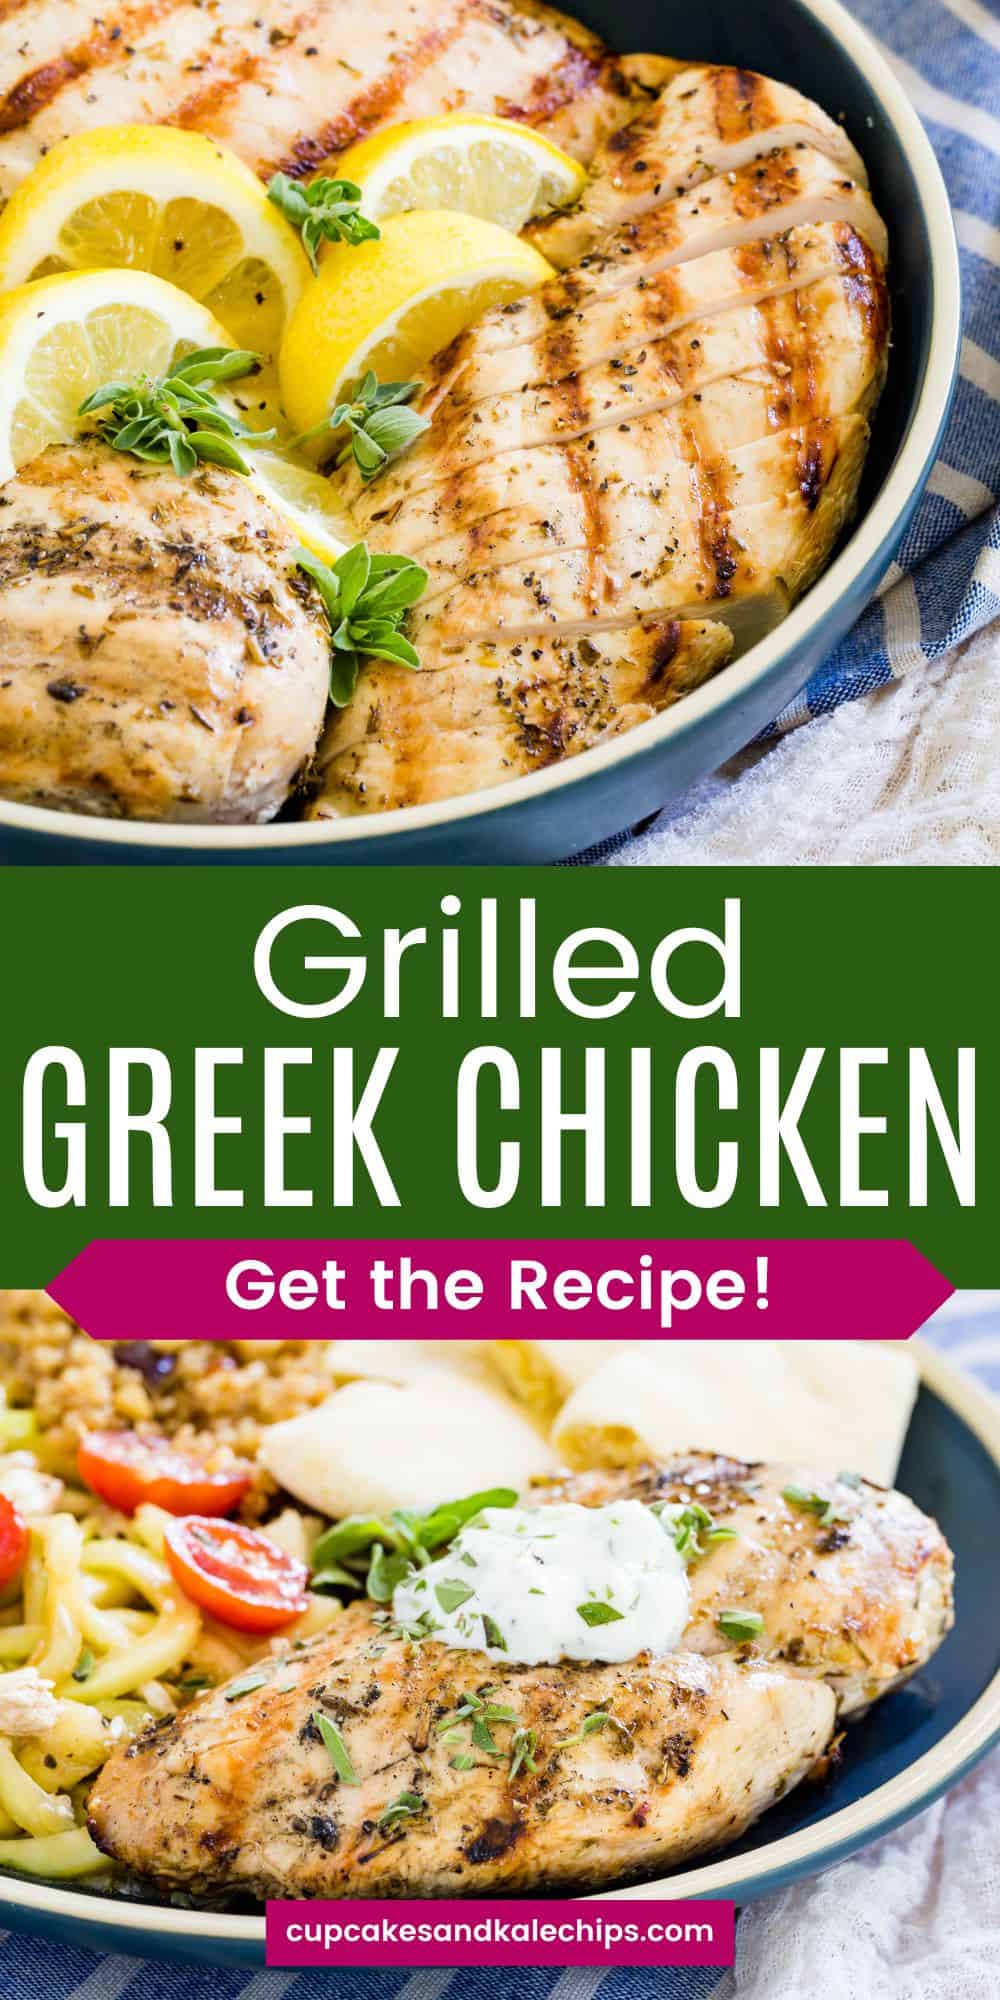 Grilled Greek Chicken Marinade | Cupcakes and Kale Chips